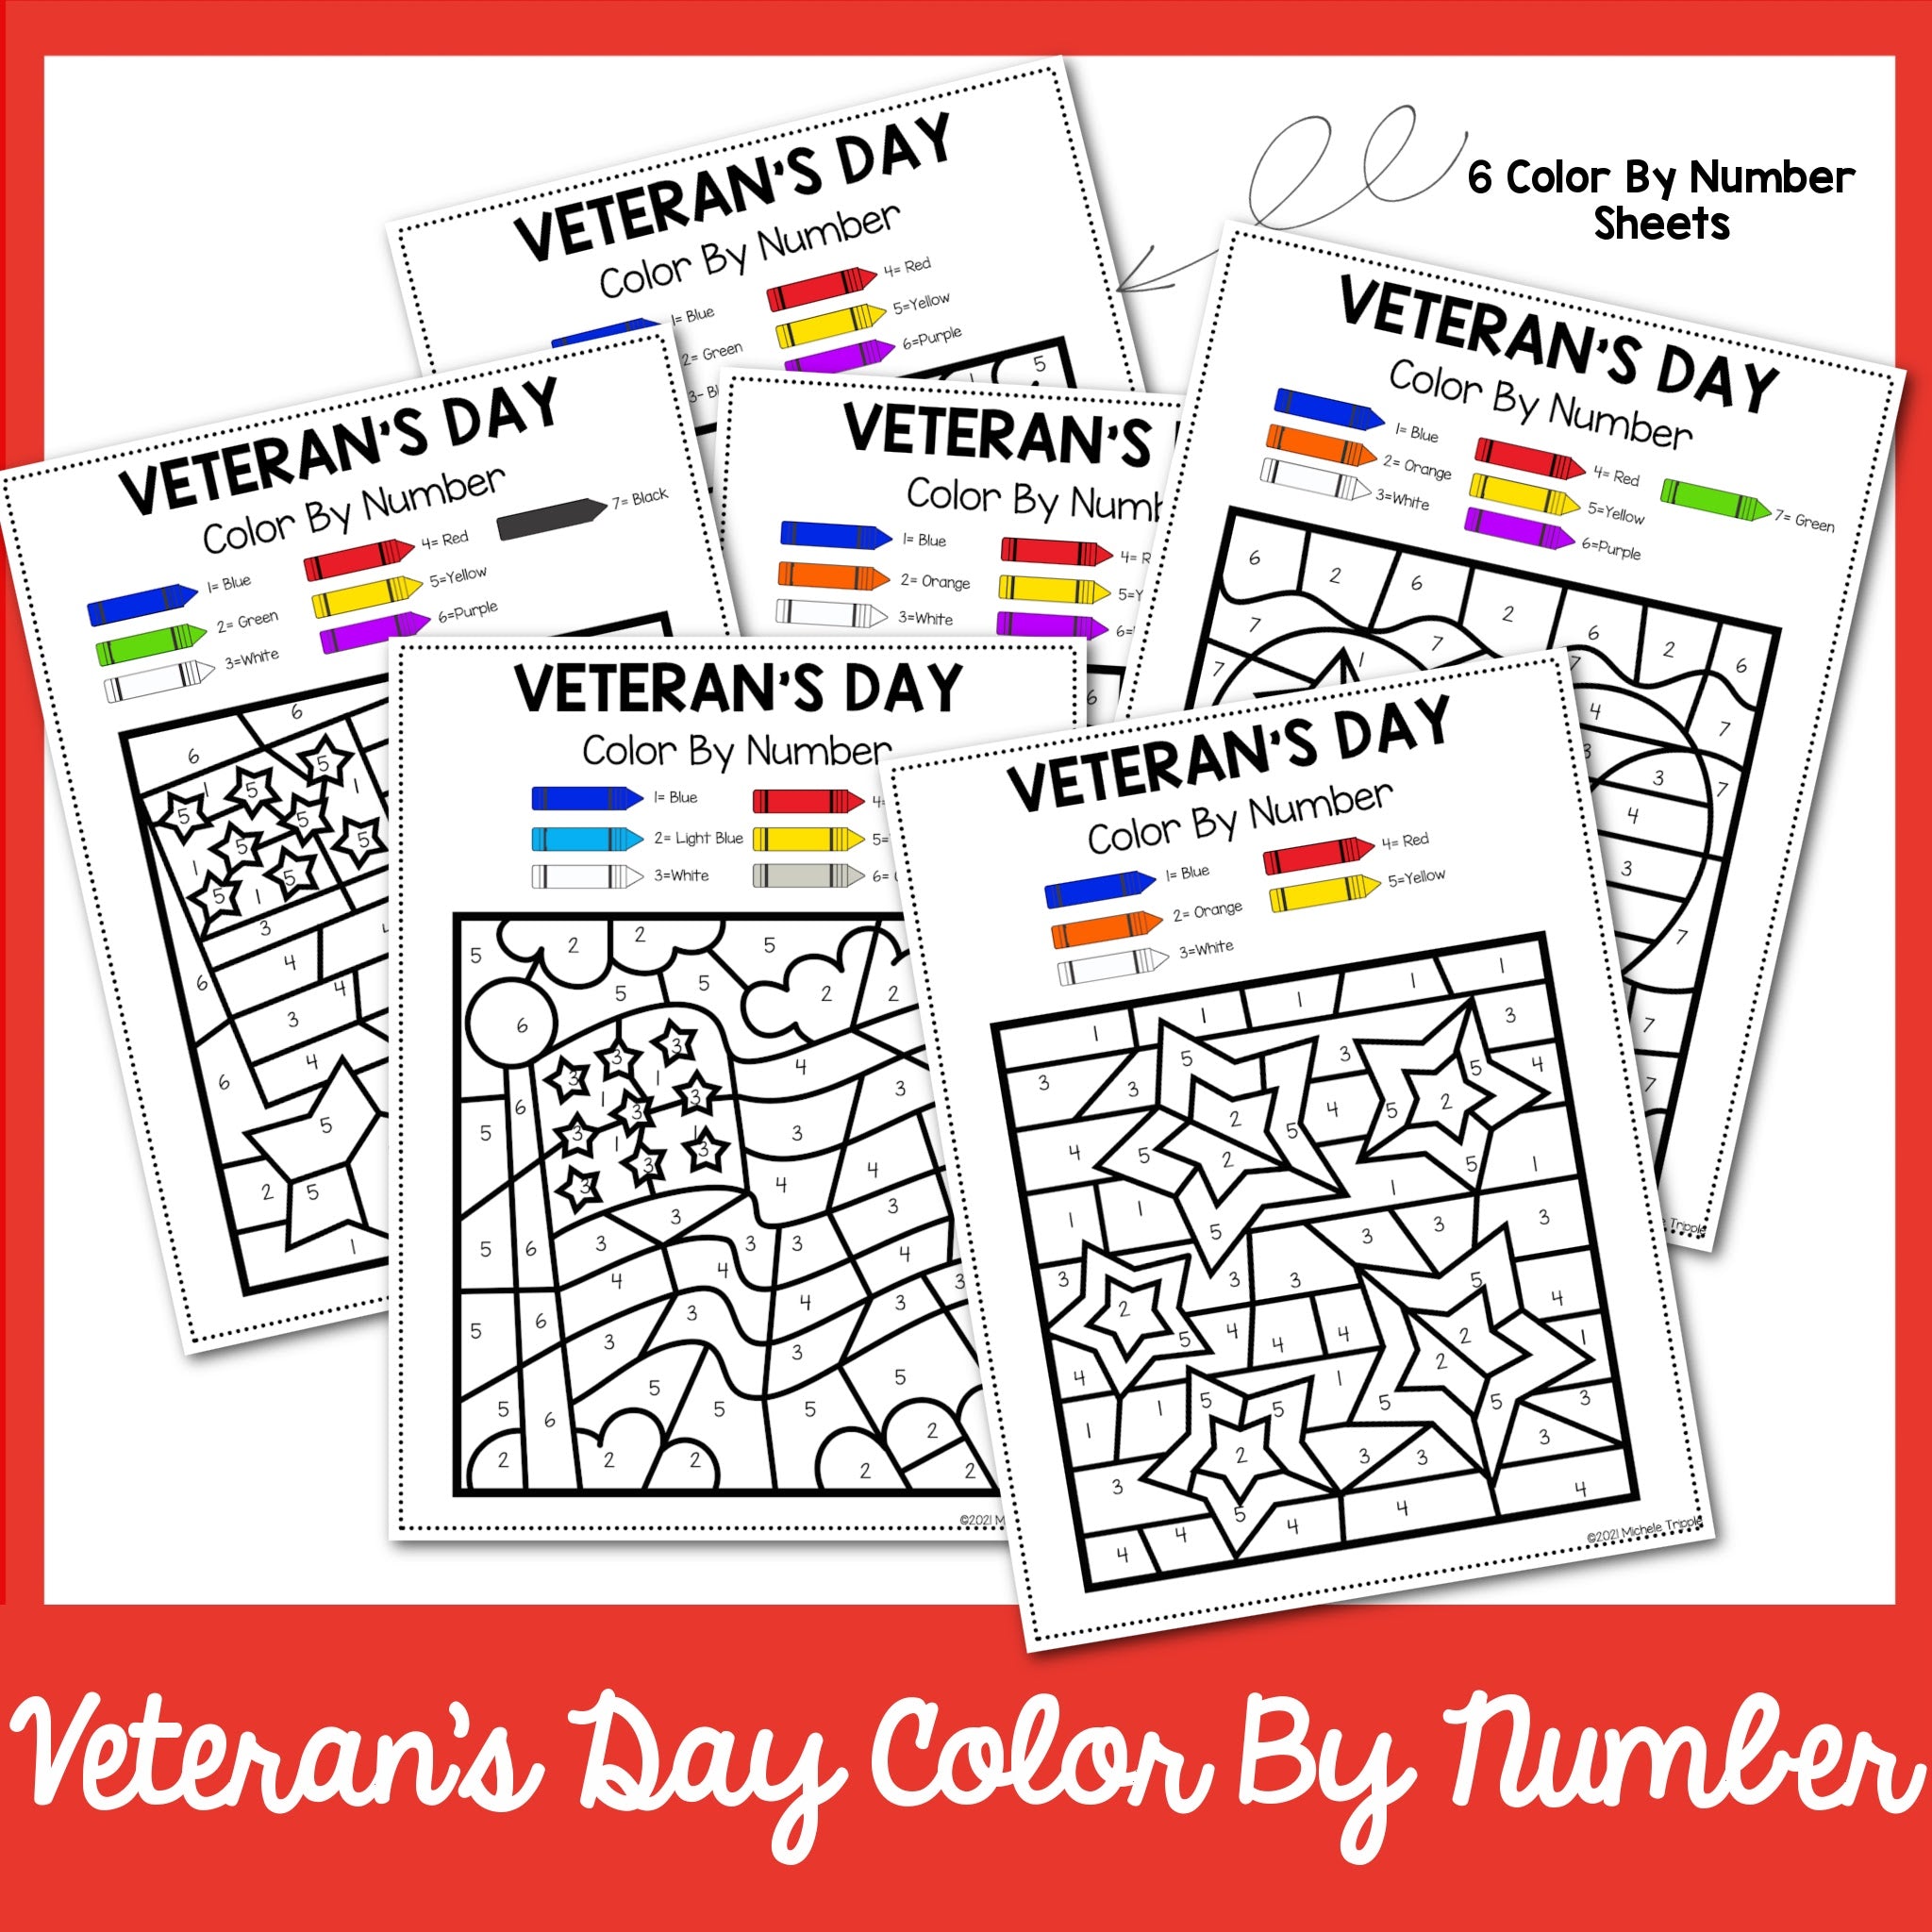 Veteran’s Day Color By Number